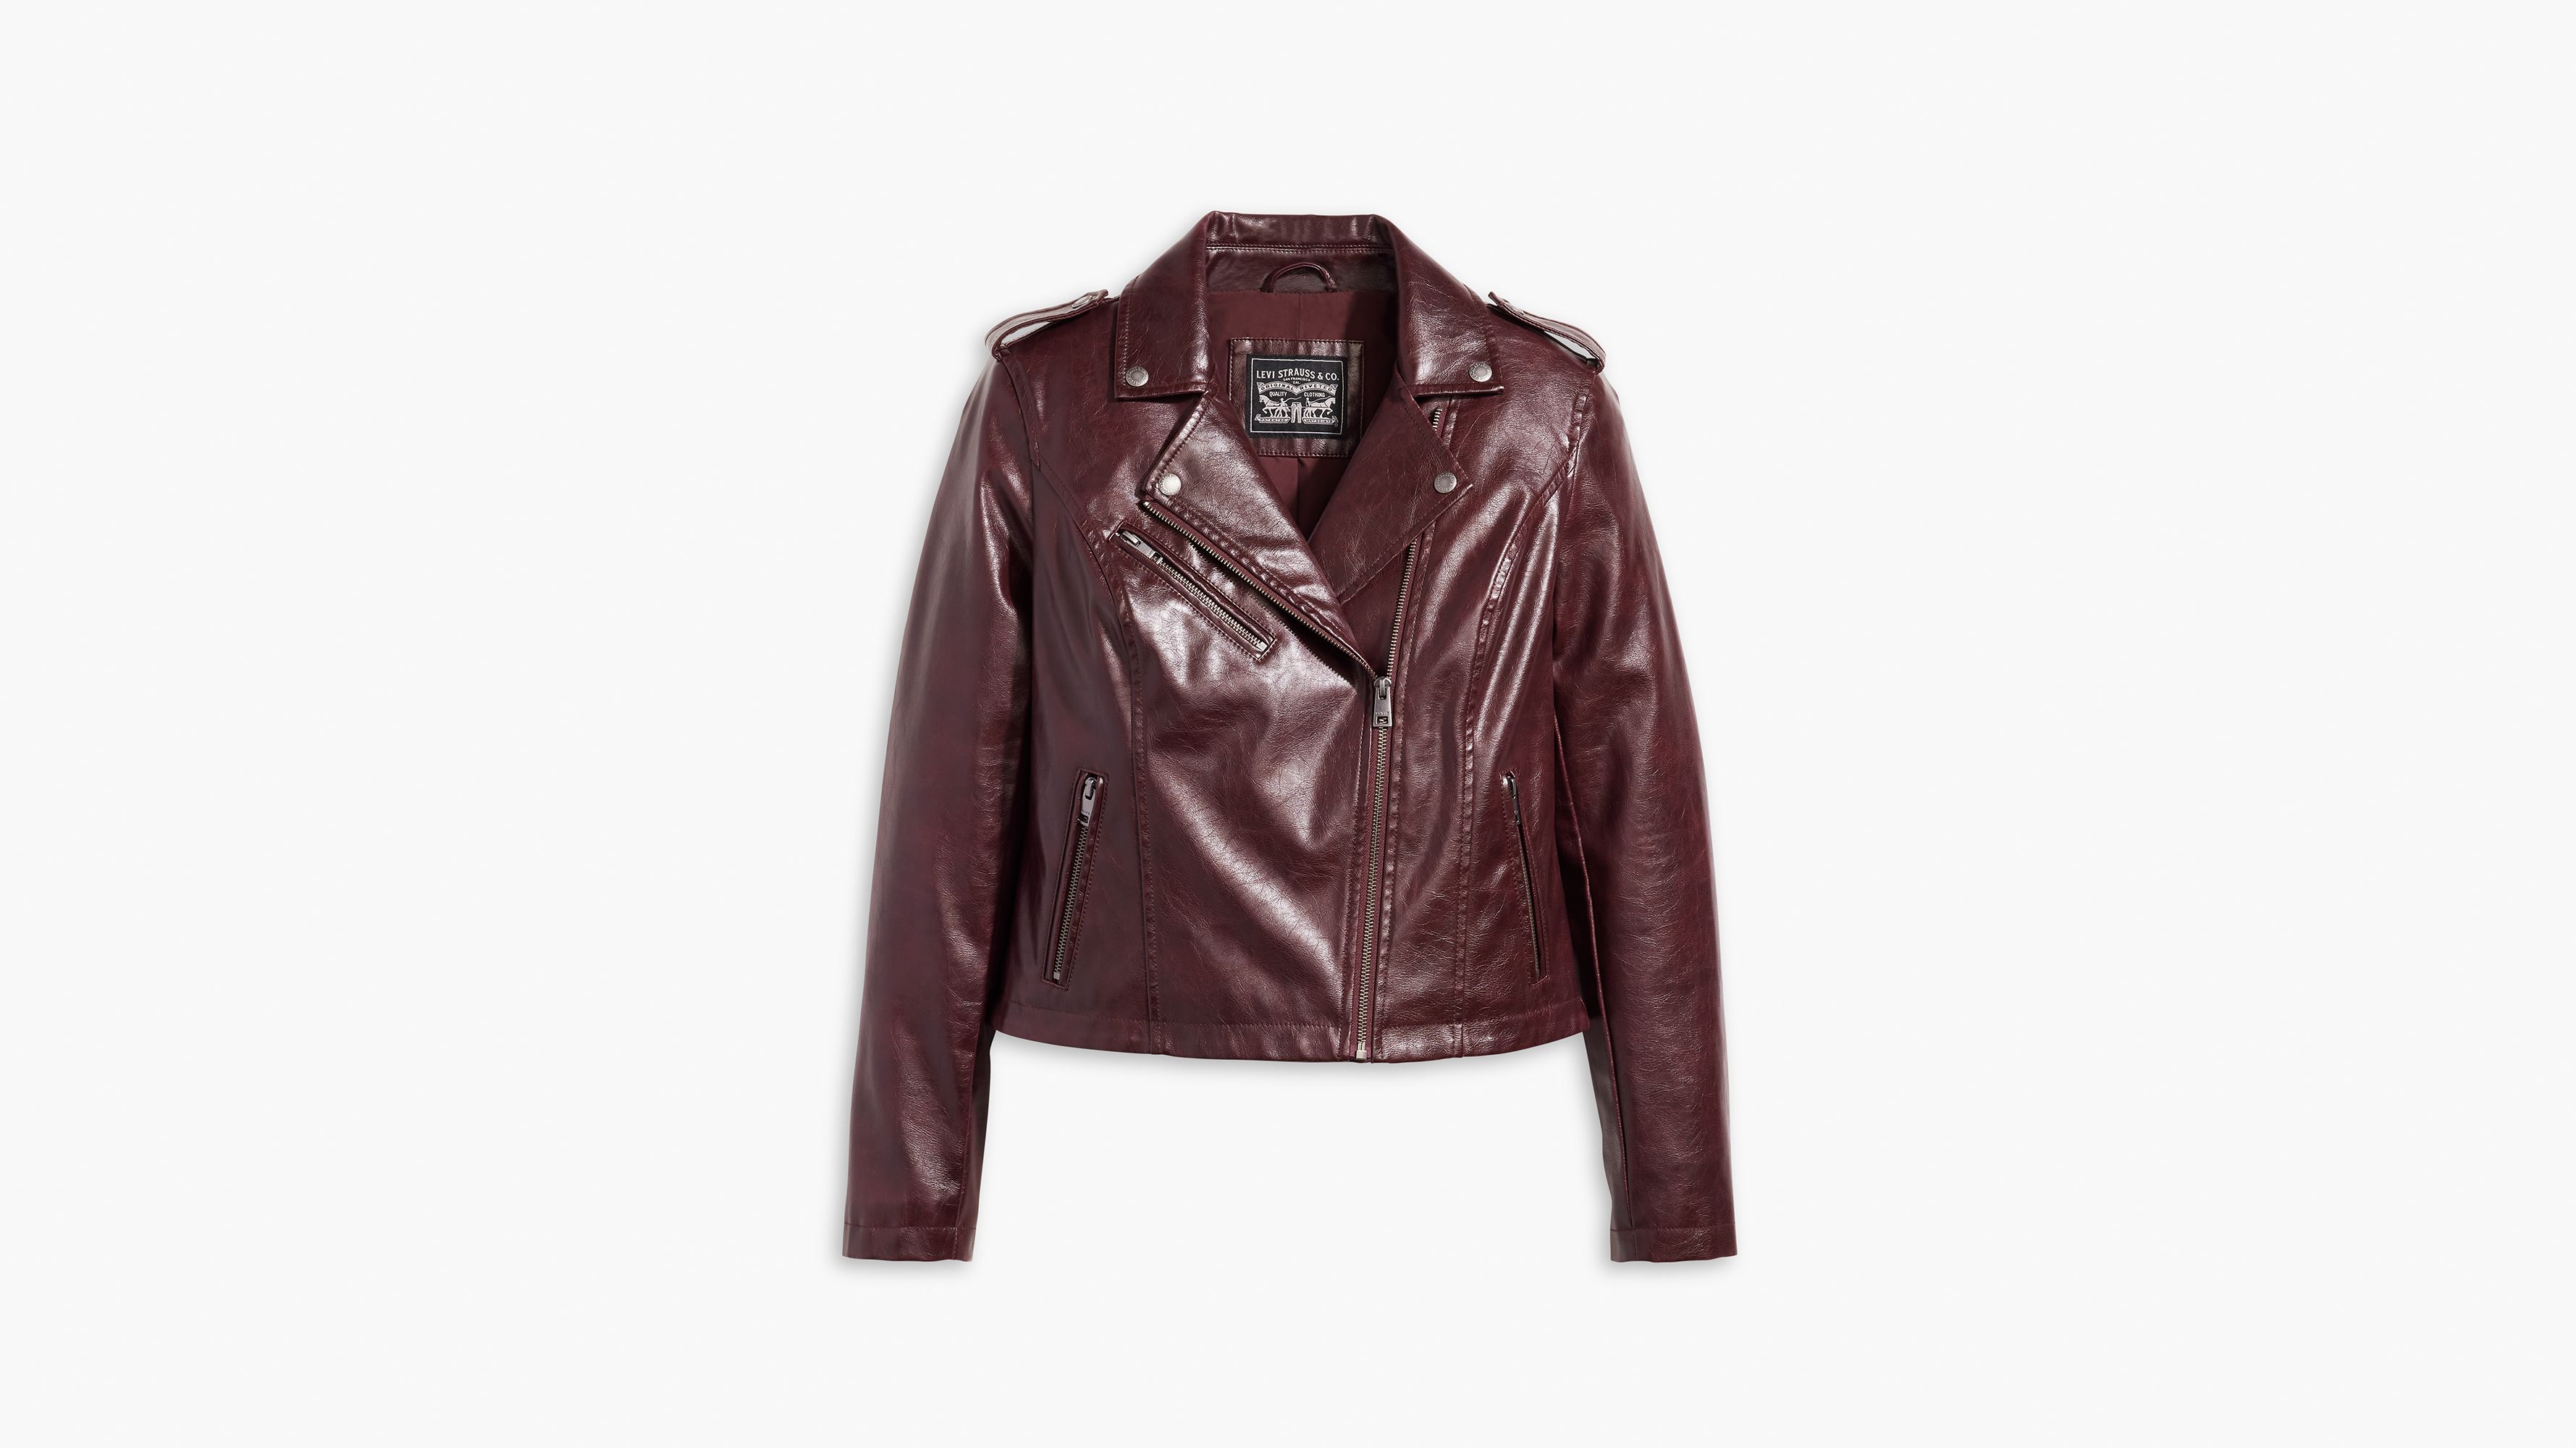 Levi's Women's Faux Leather Bomber with Laydown Collar, Biscotti, X-Small  at  Women's Coats Shop